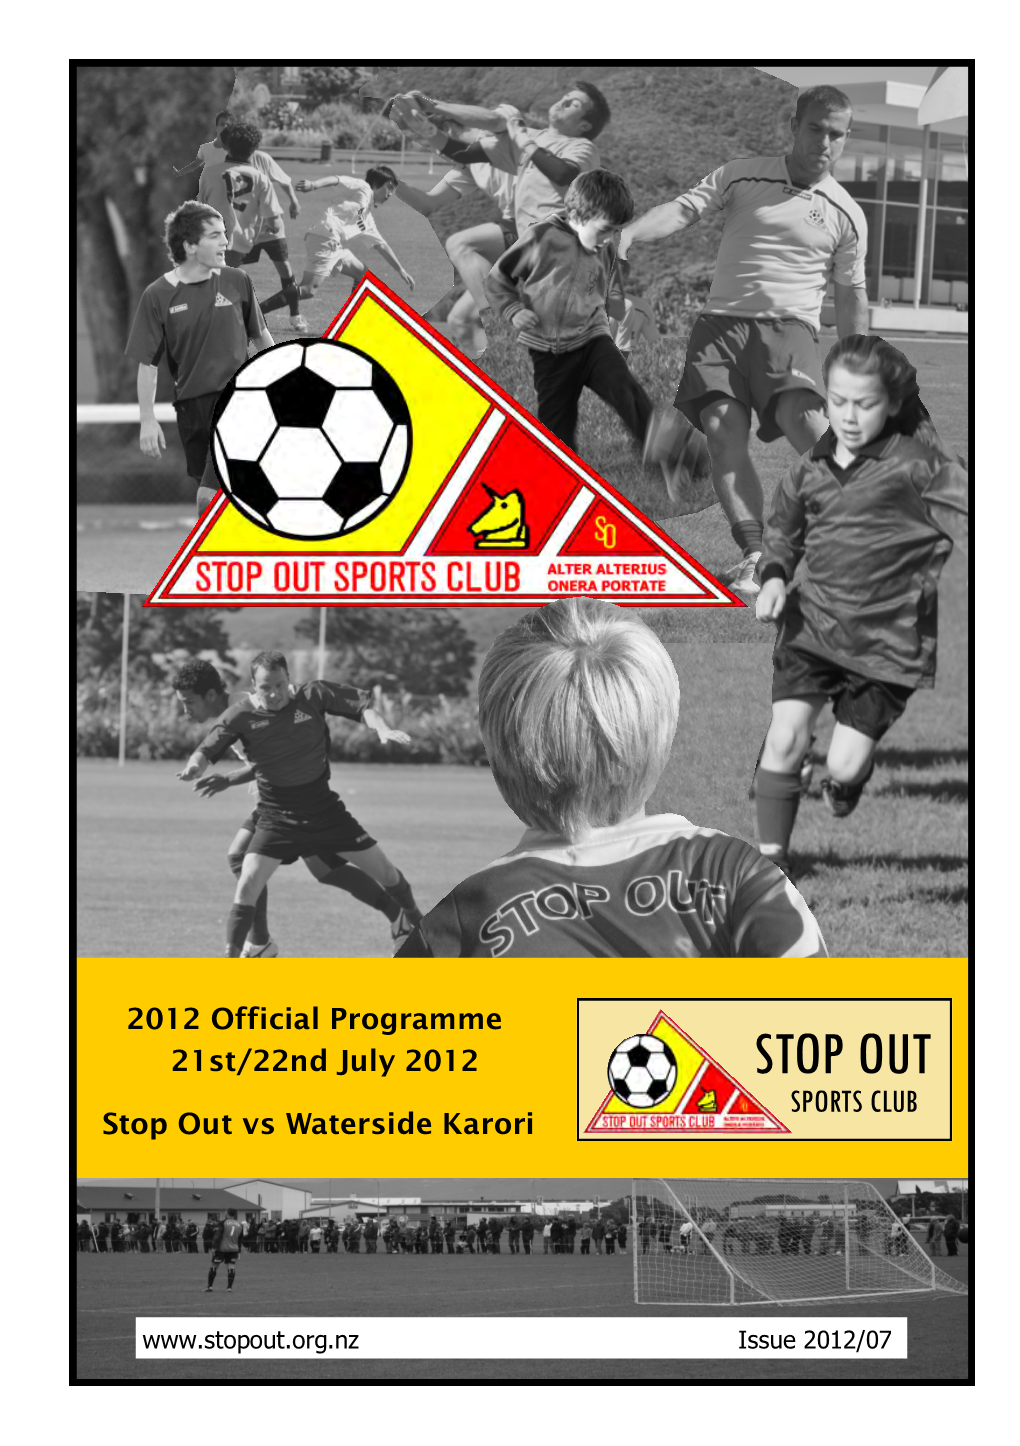 STOP out SPORTS CLUB Stop out Vs Waterside Karori